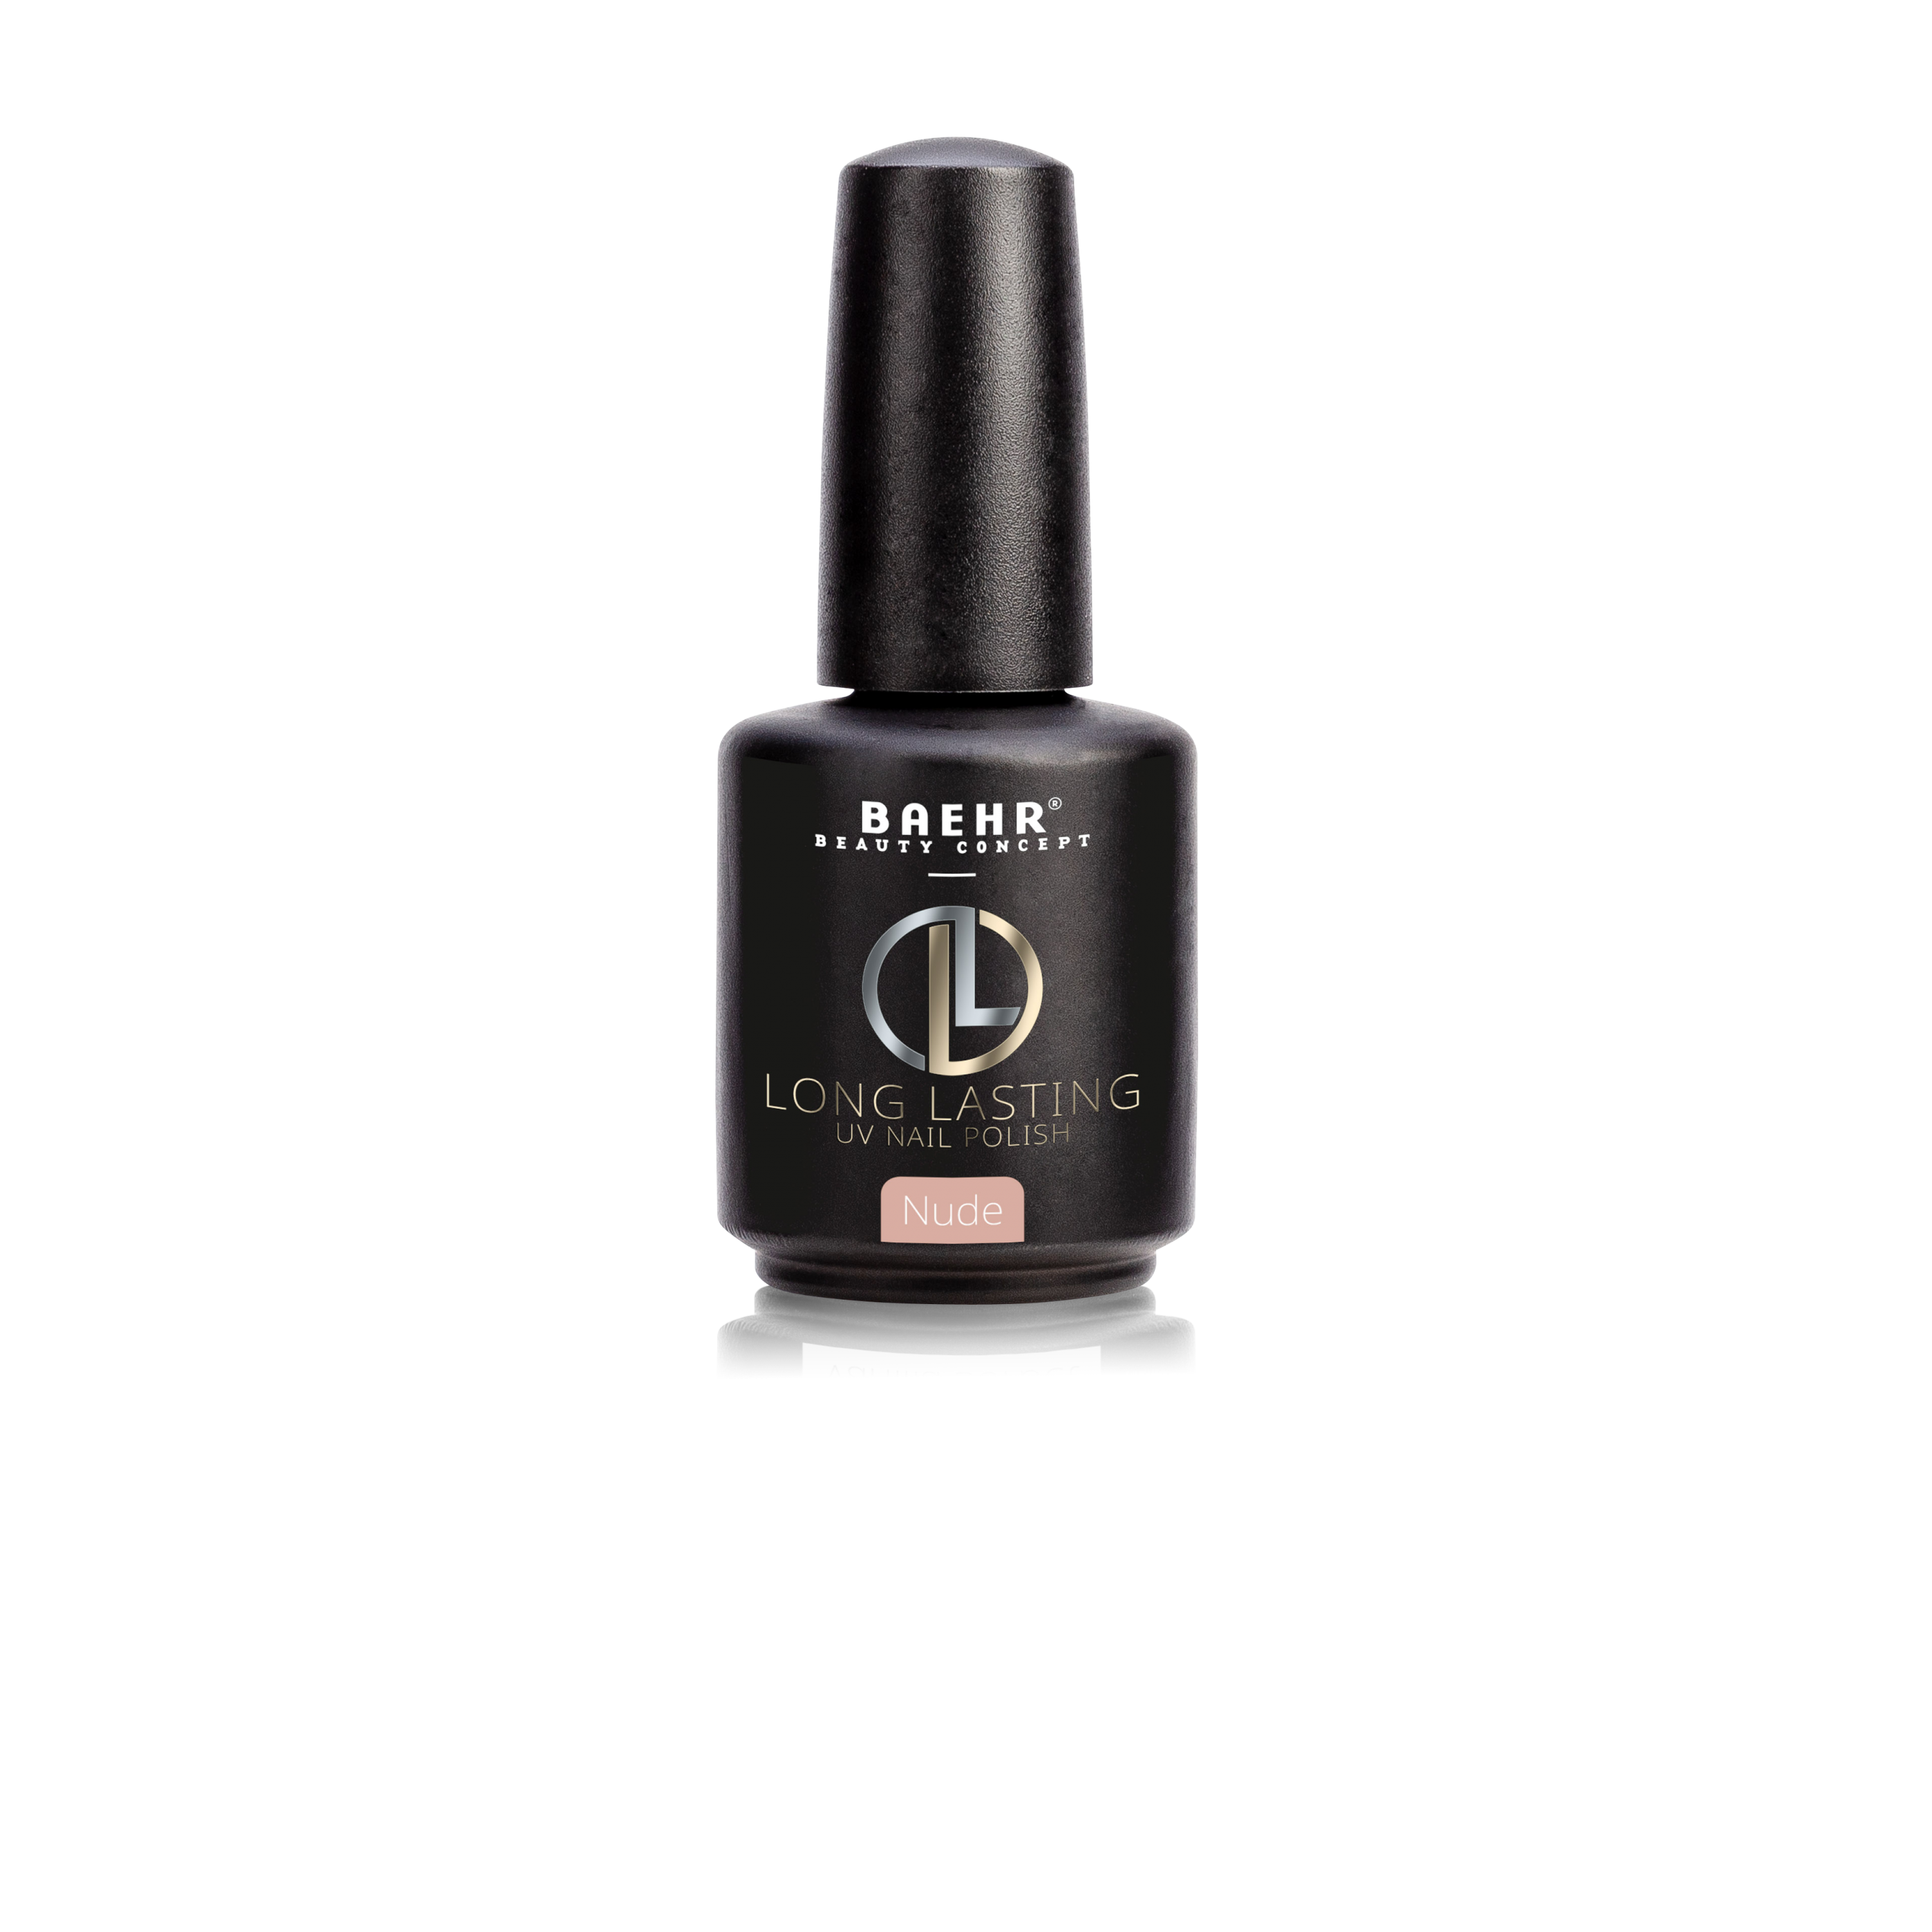 BAEHR BEAUTY CONCEPT - NAILS Long Lasting Nude 13 g